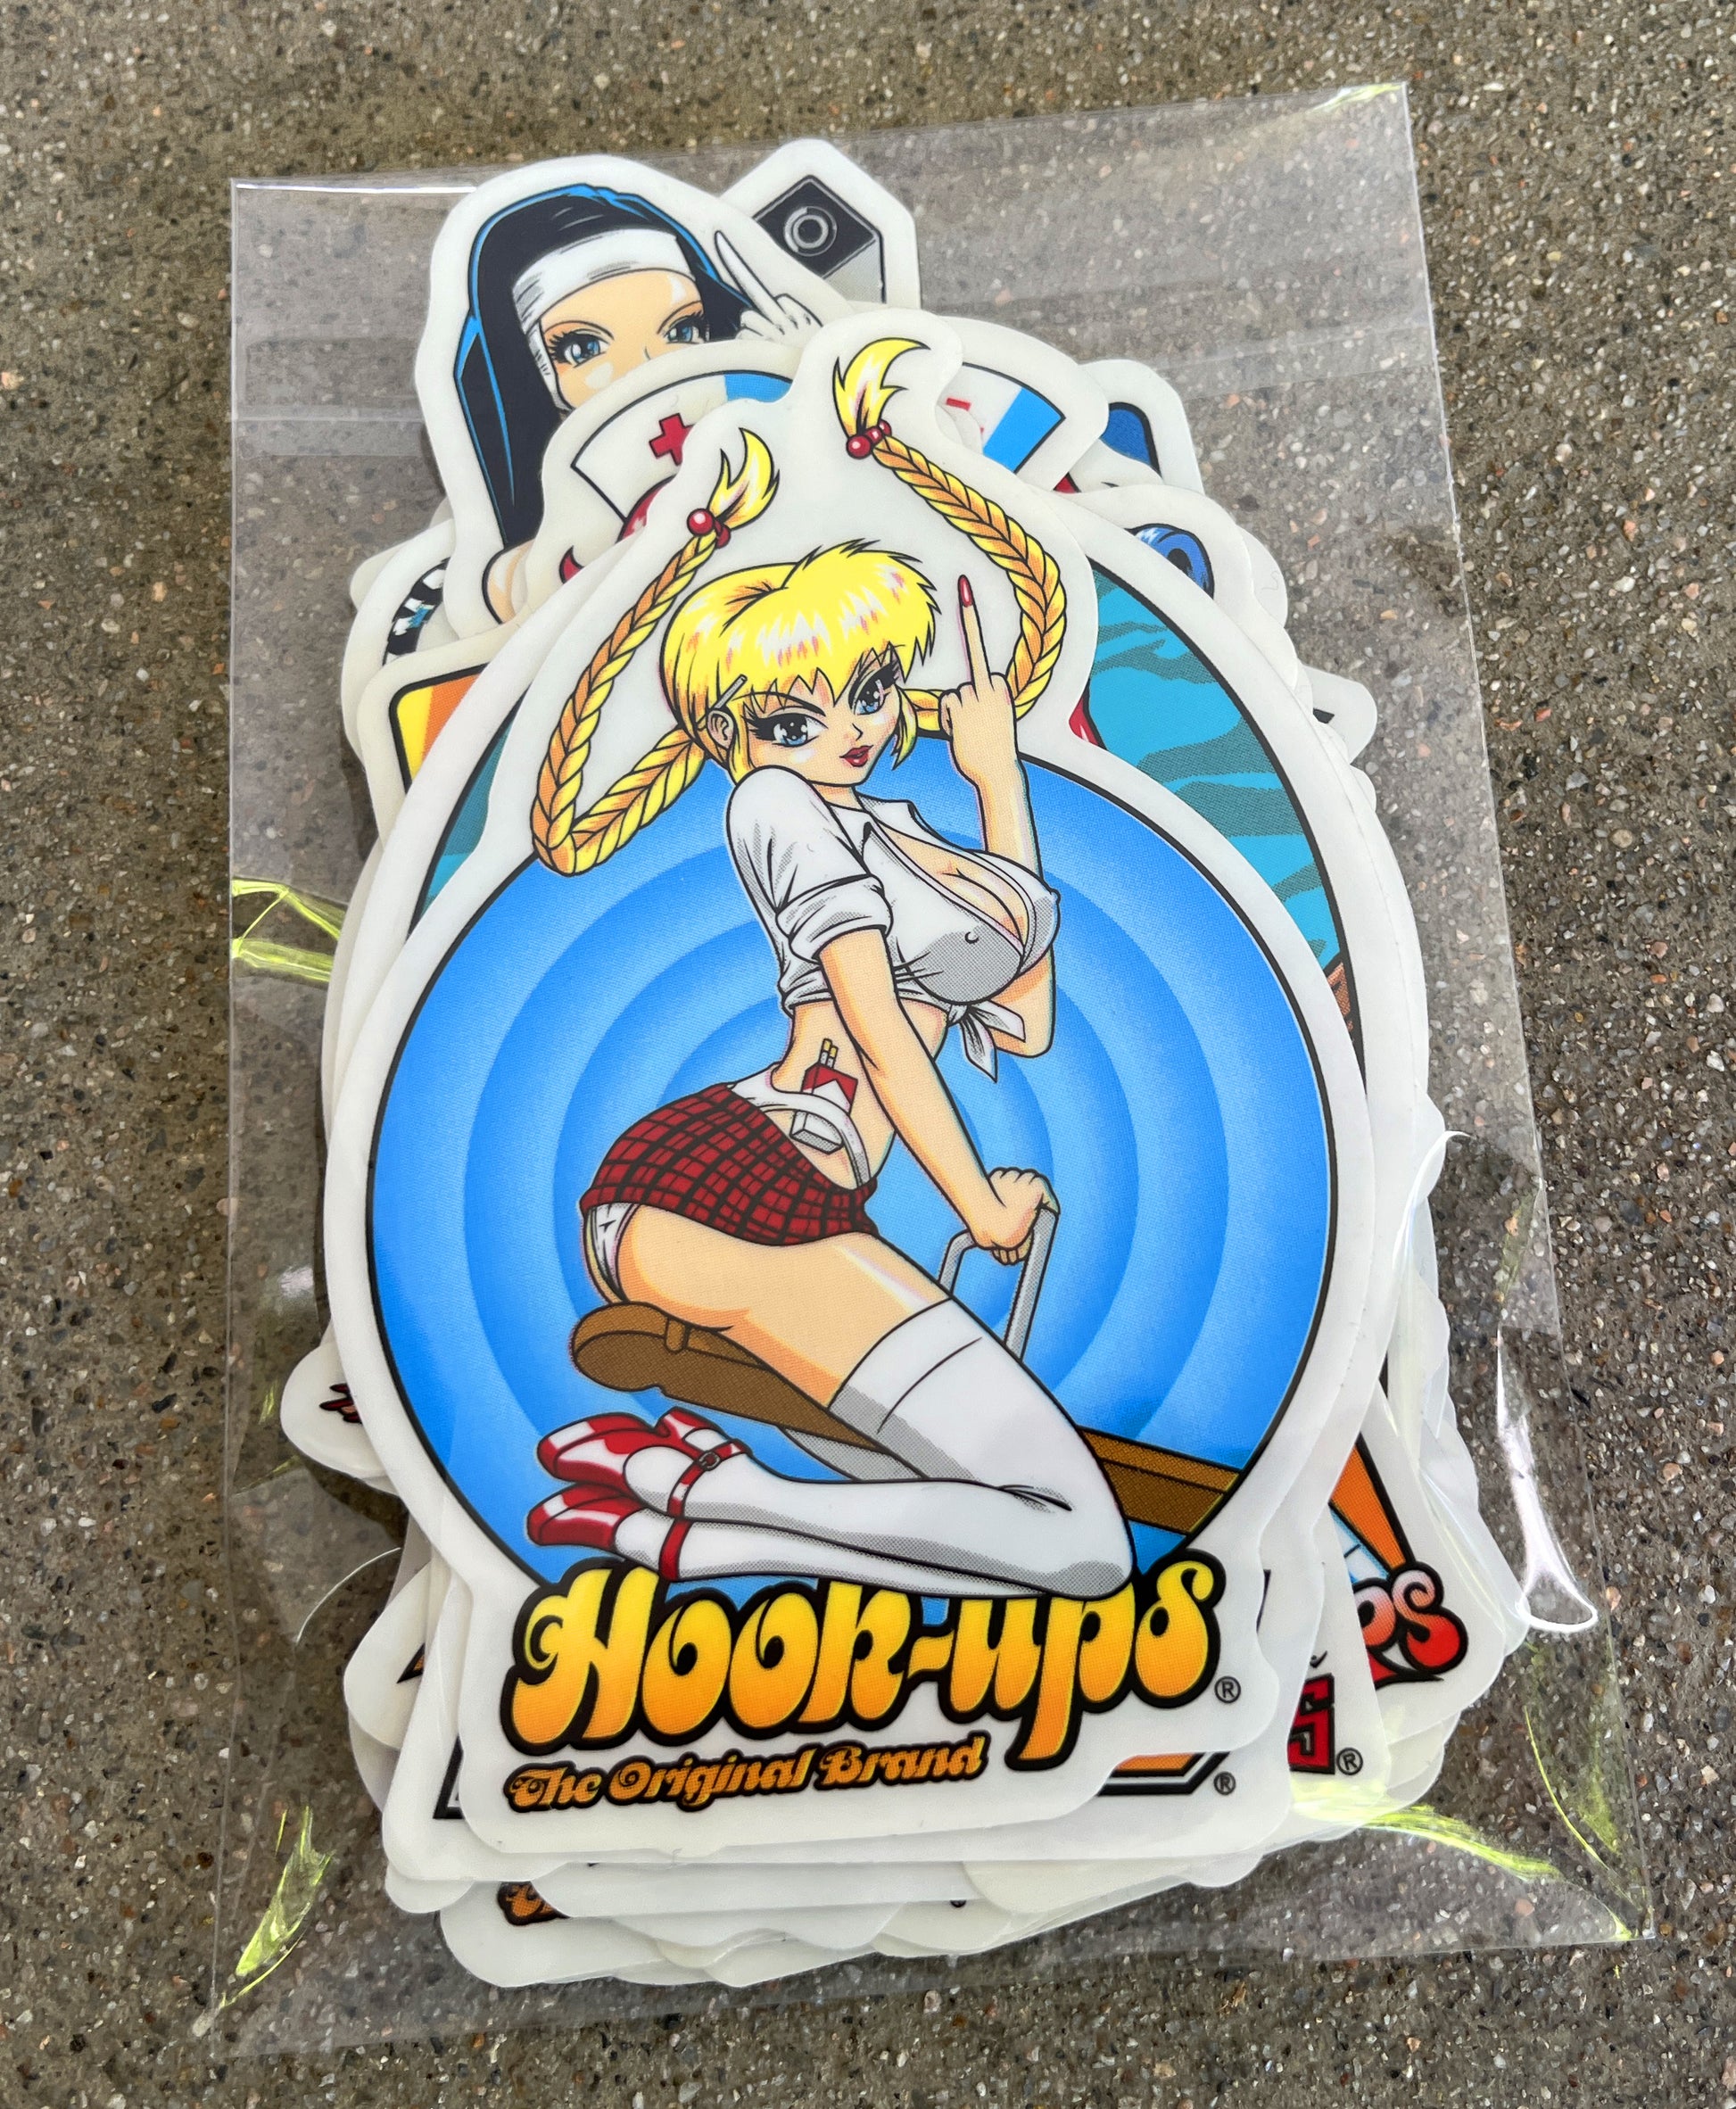 hook-ups classic stickers 30 pack 1 – hookups